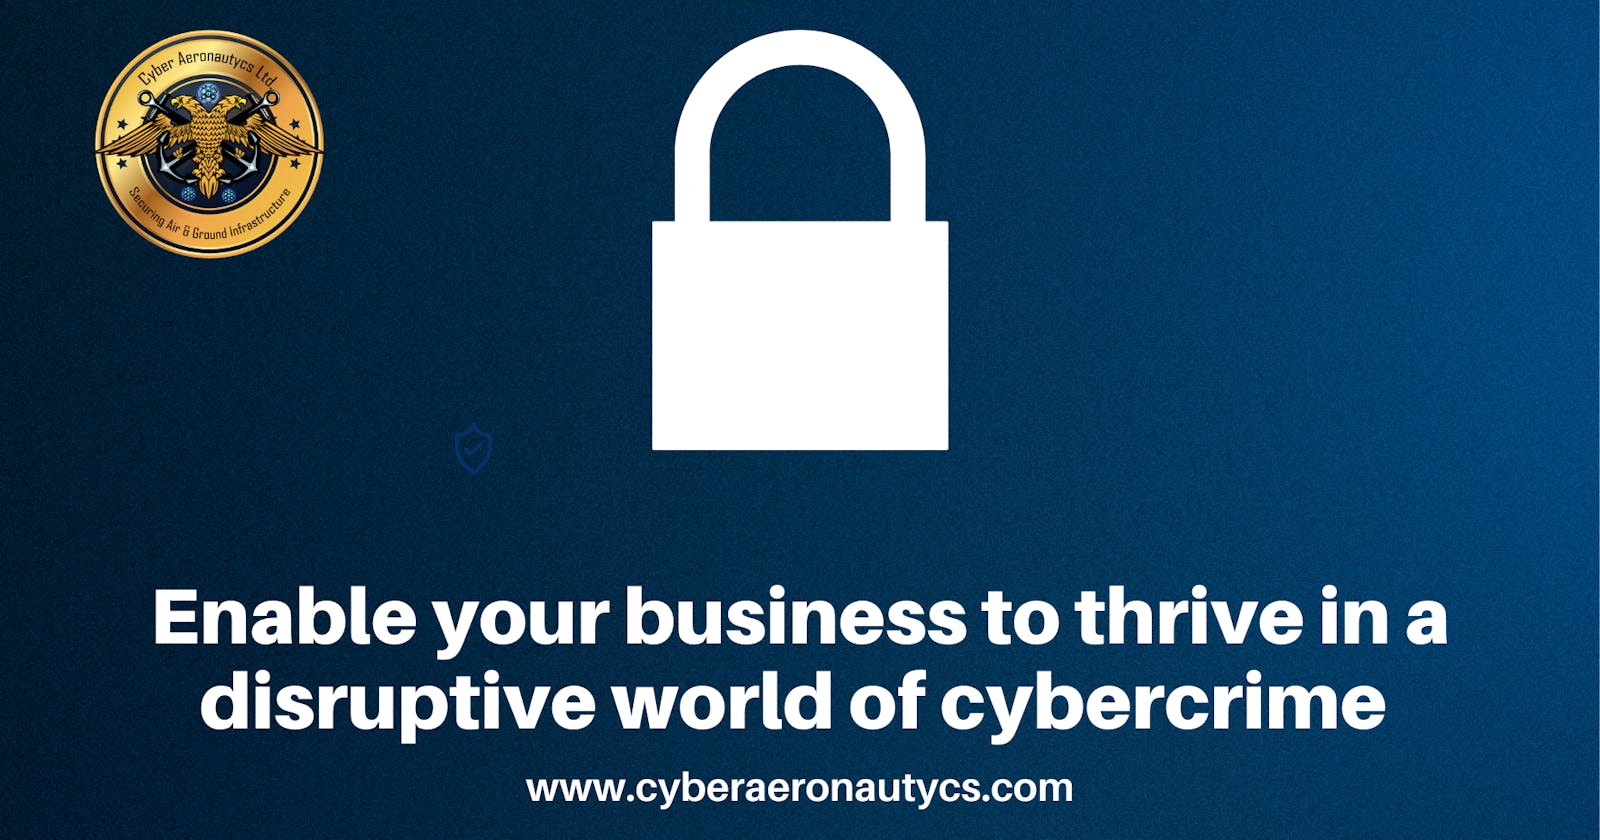 Enable your business to thrive in a disruptive world of cyber crime